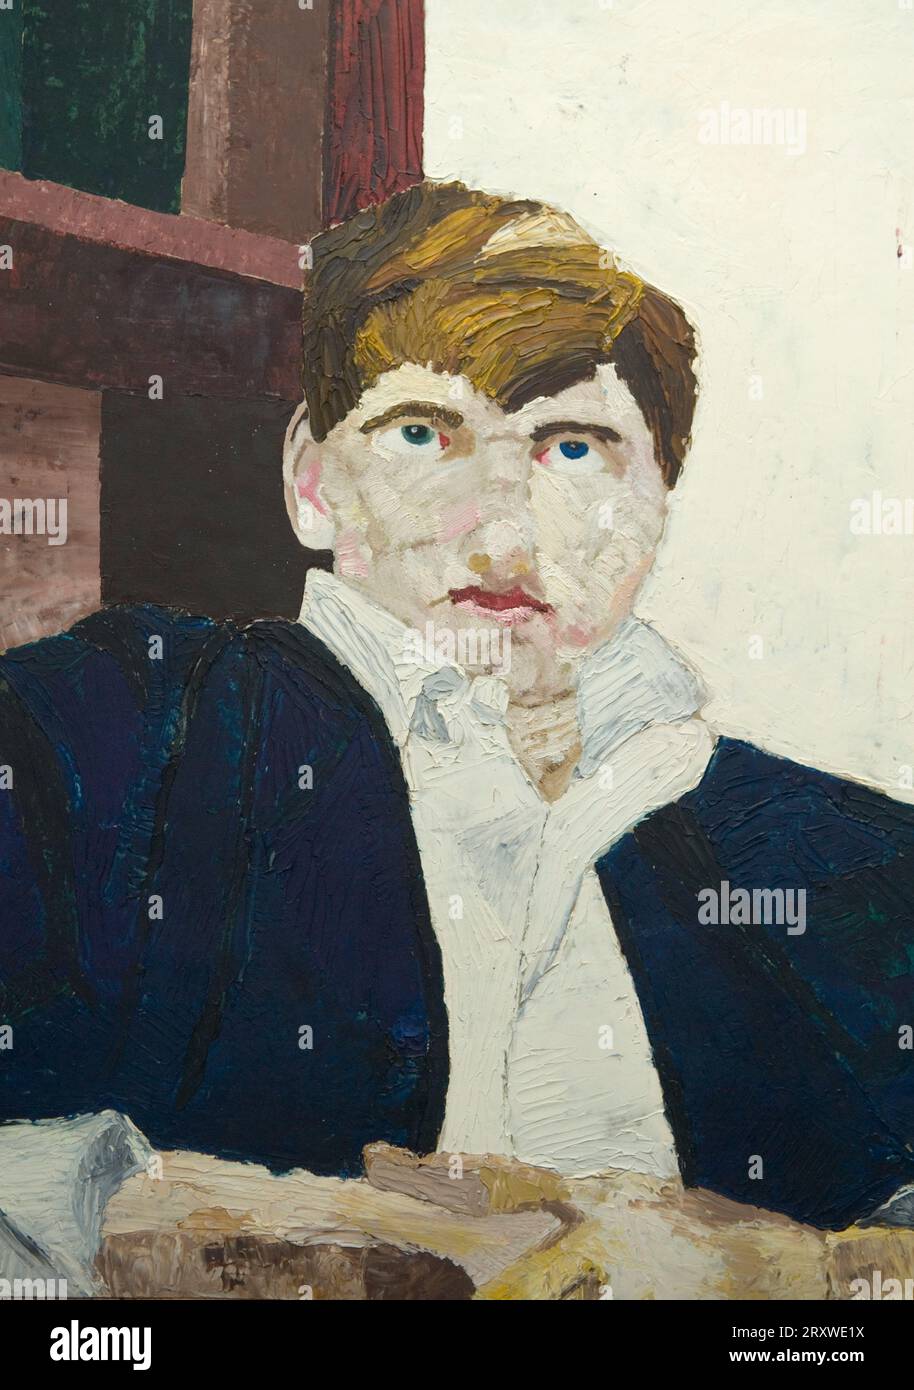 Art student portrait of Hilary Sheppard in the Lower Sixth form. Painting by Homer Sykes from a photograph and life. Age 18yrs. Sidcot School, Winscombe, Somerset. Art master Mr James Bradley 1967. 1960s UK HOMER SYKES Stock Photo